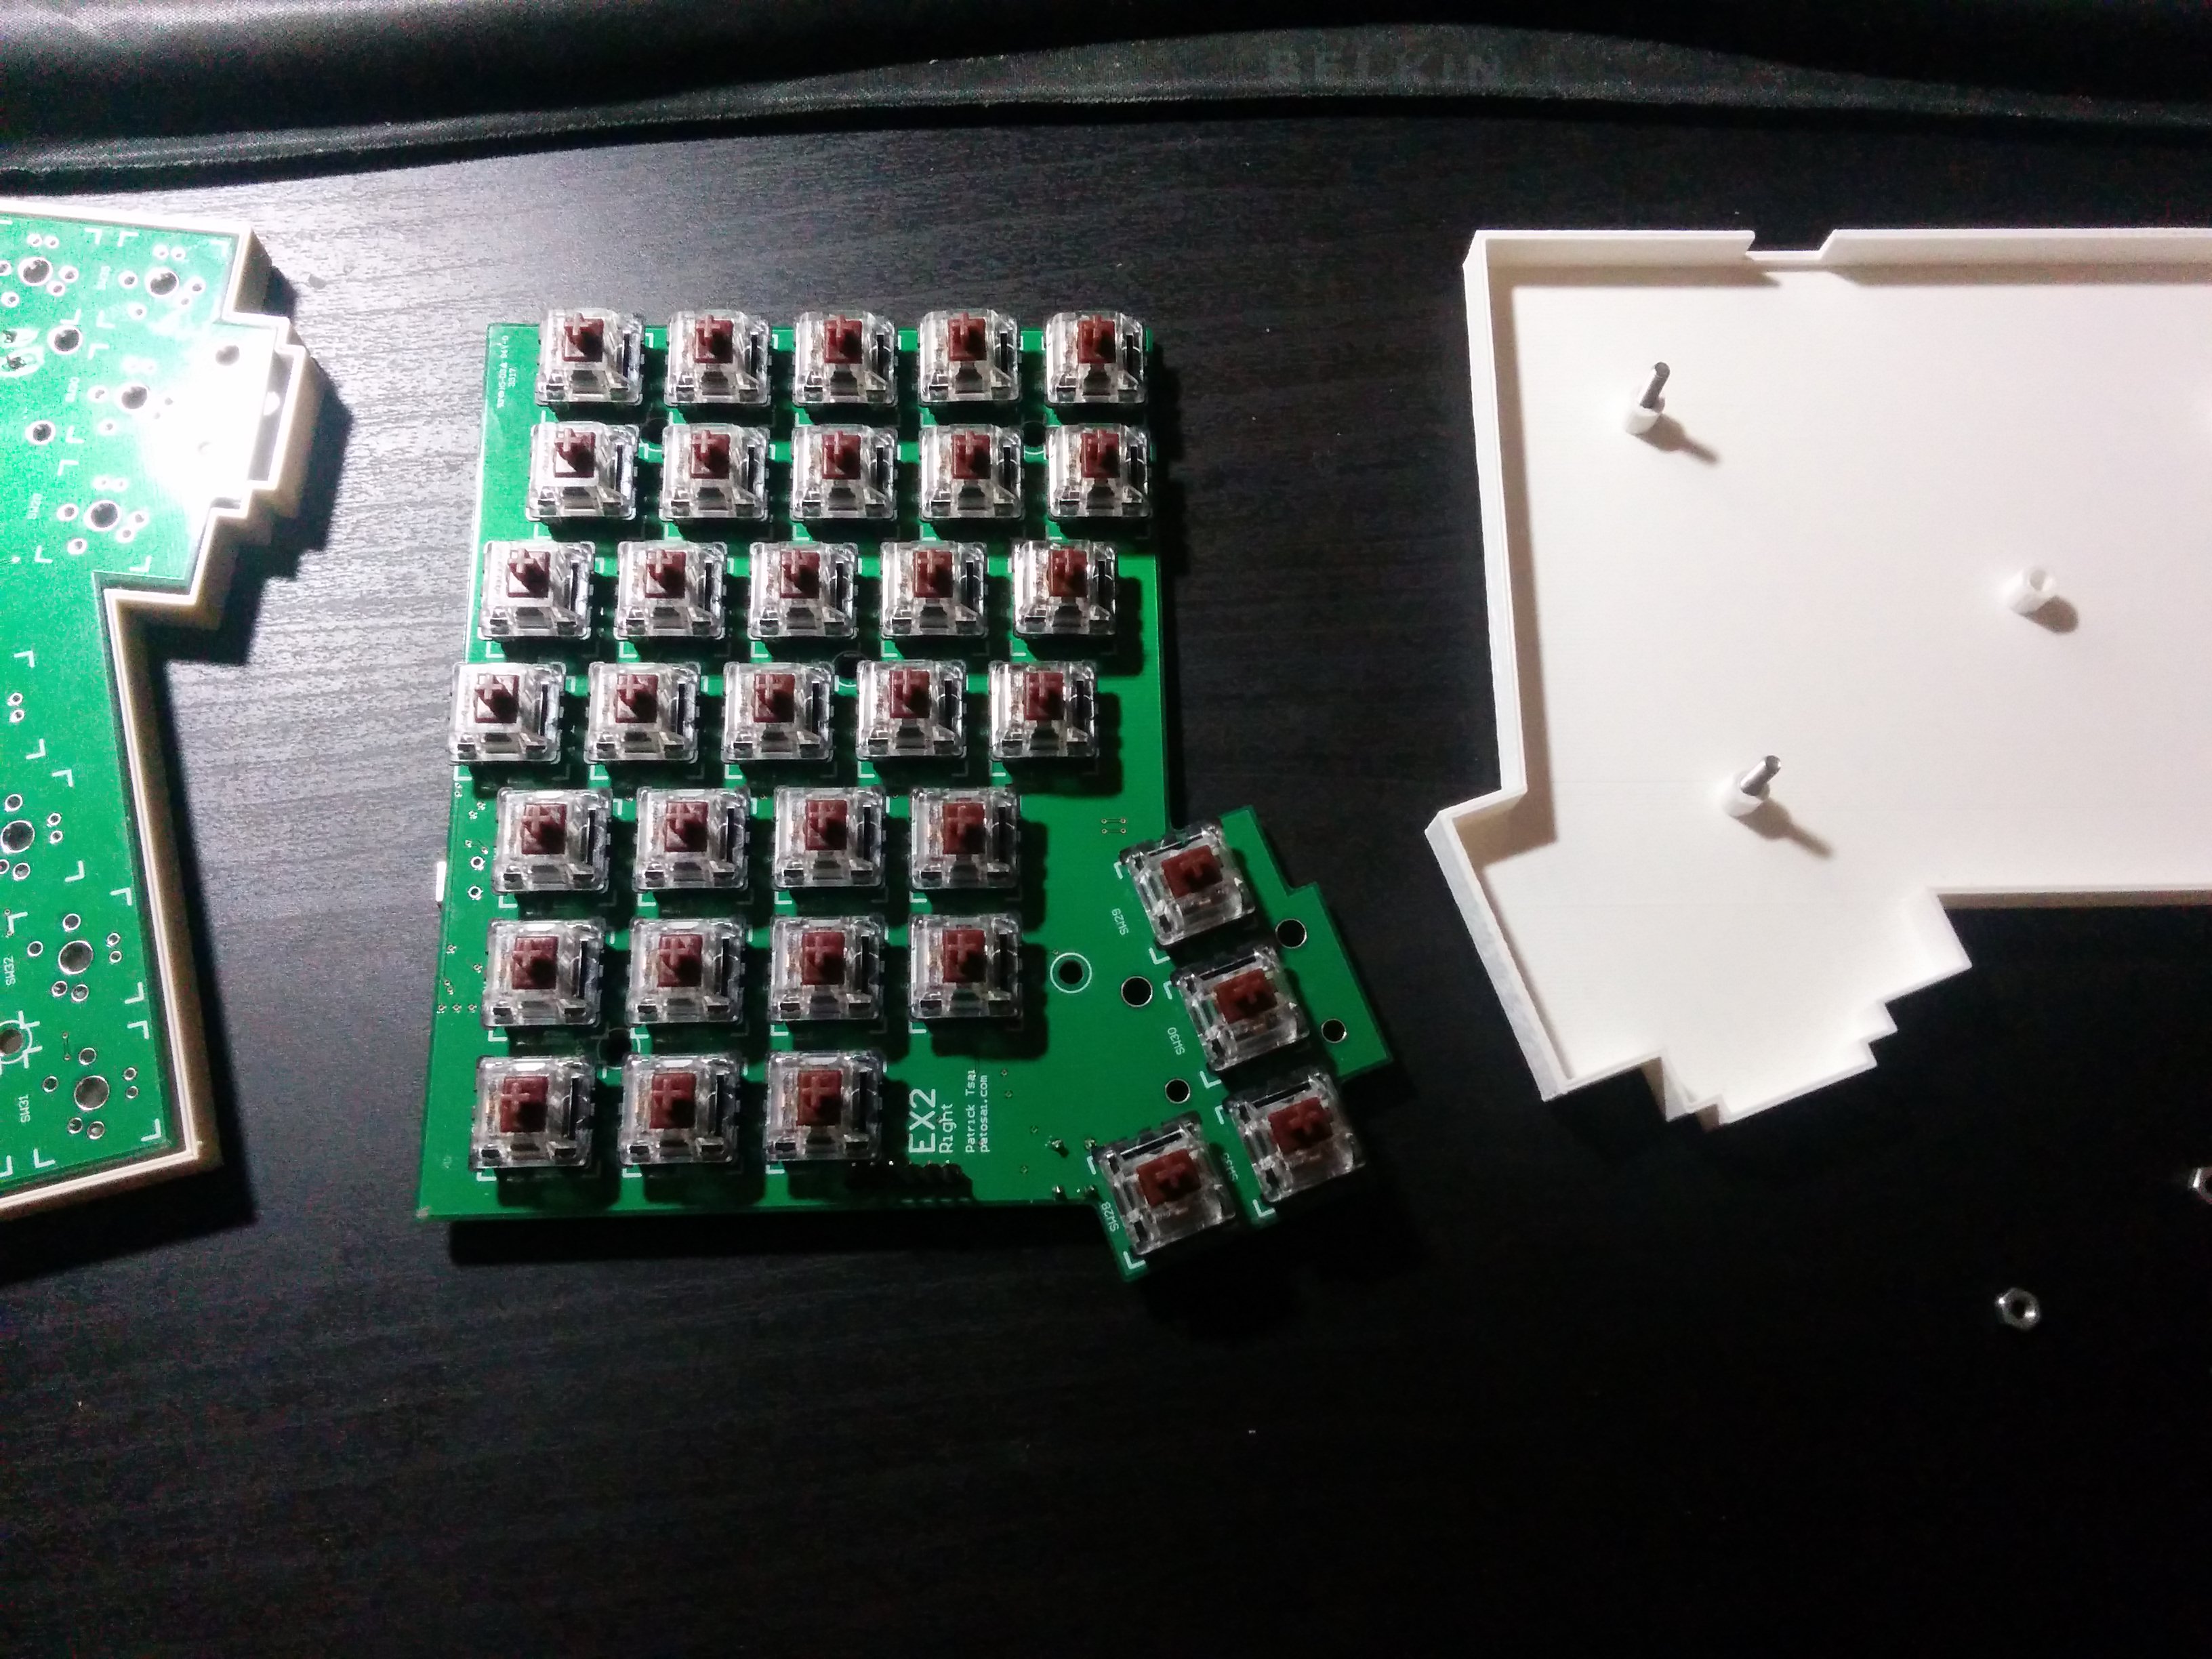 soldering it together - with all switches